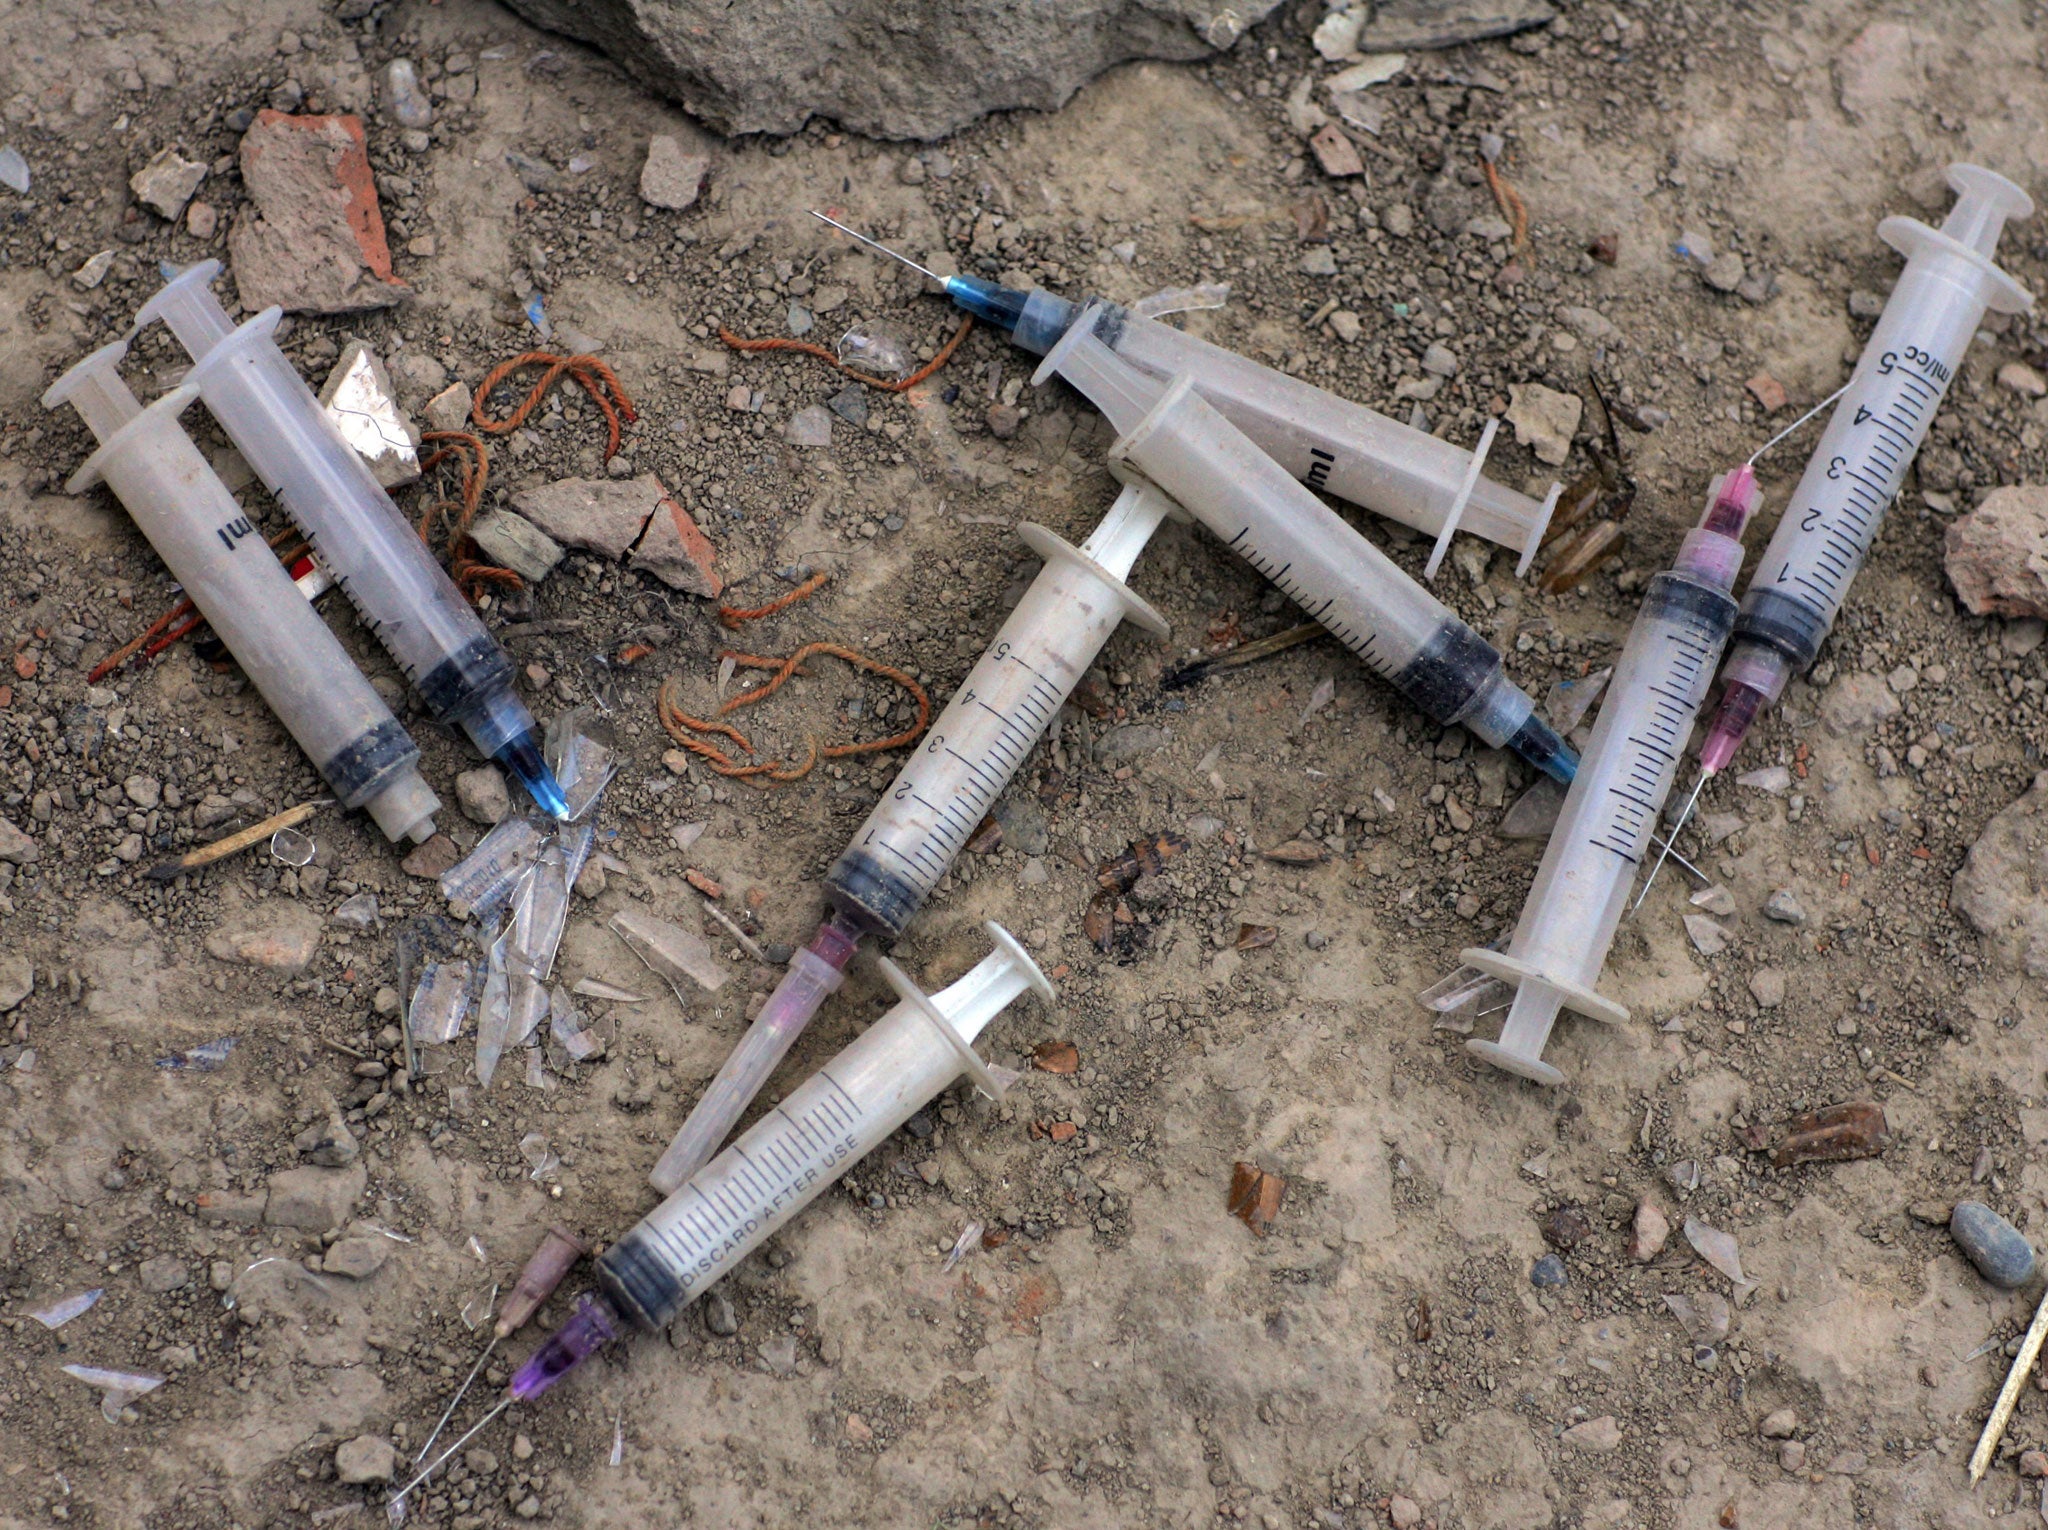 Used needles litter the ground outside an abandoned building where many addicts live August 20, 2007 in Kabul, Afghanistan.